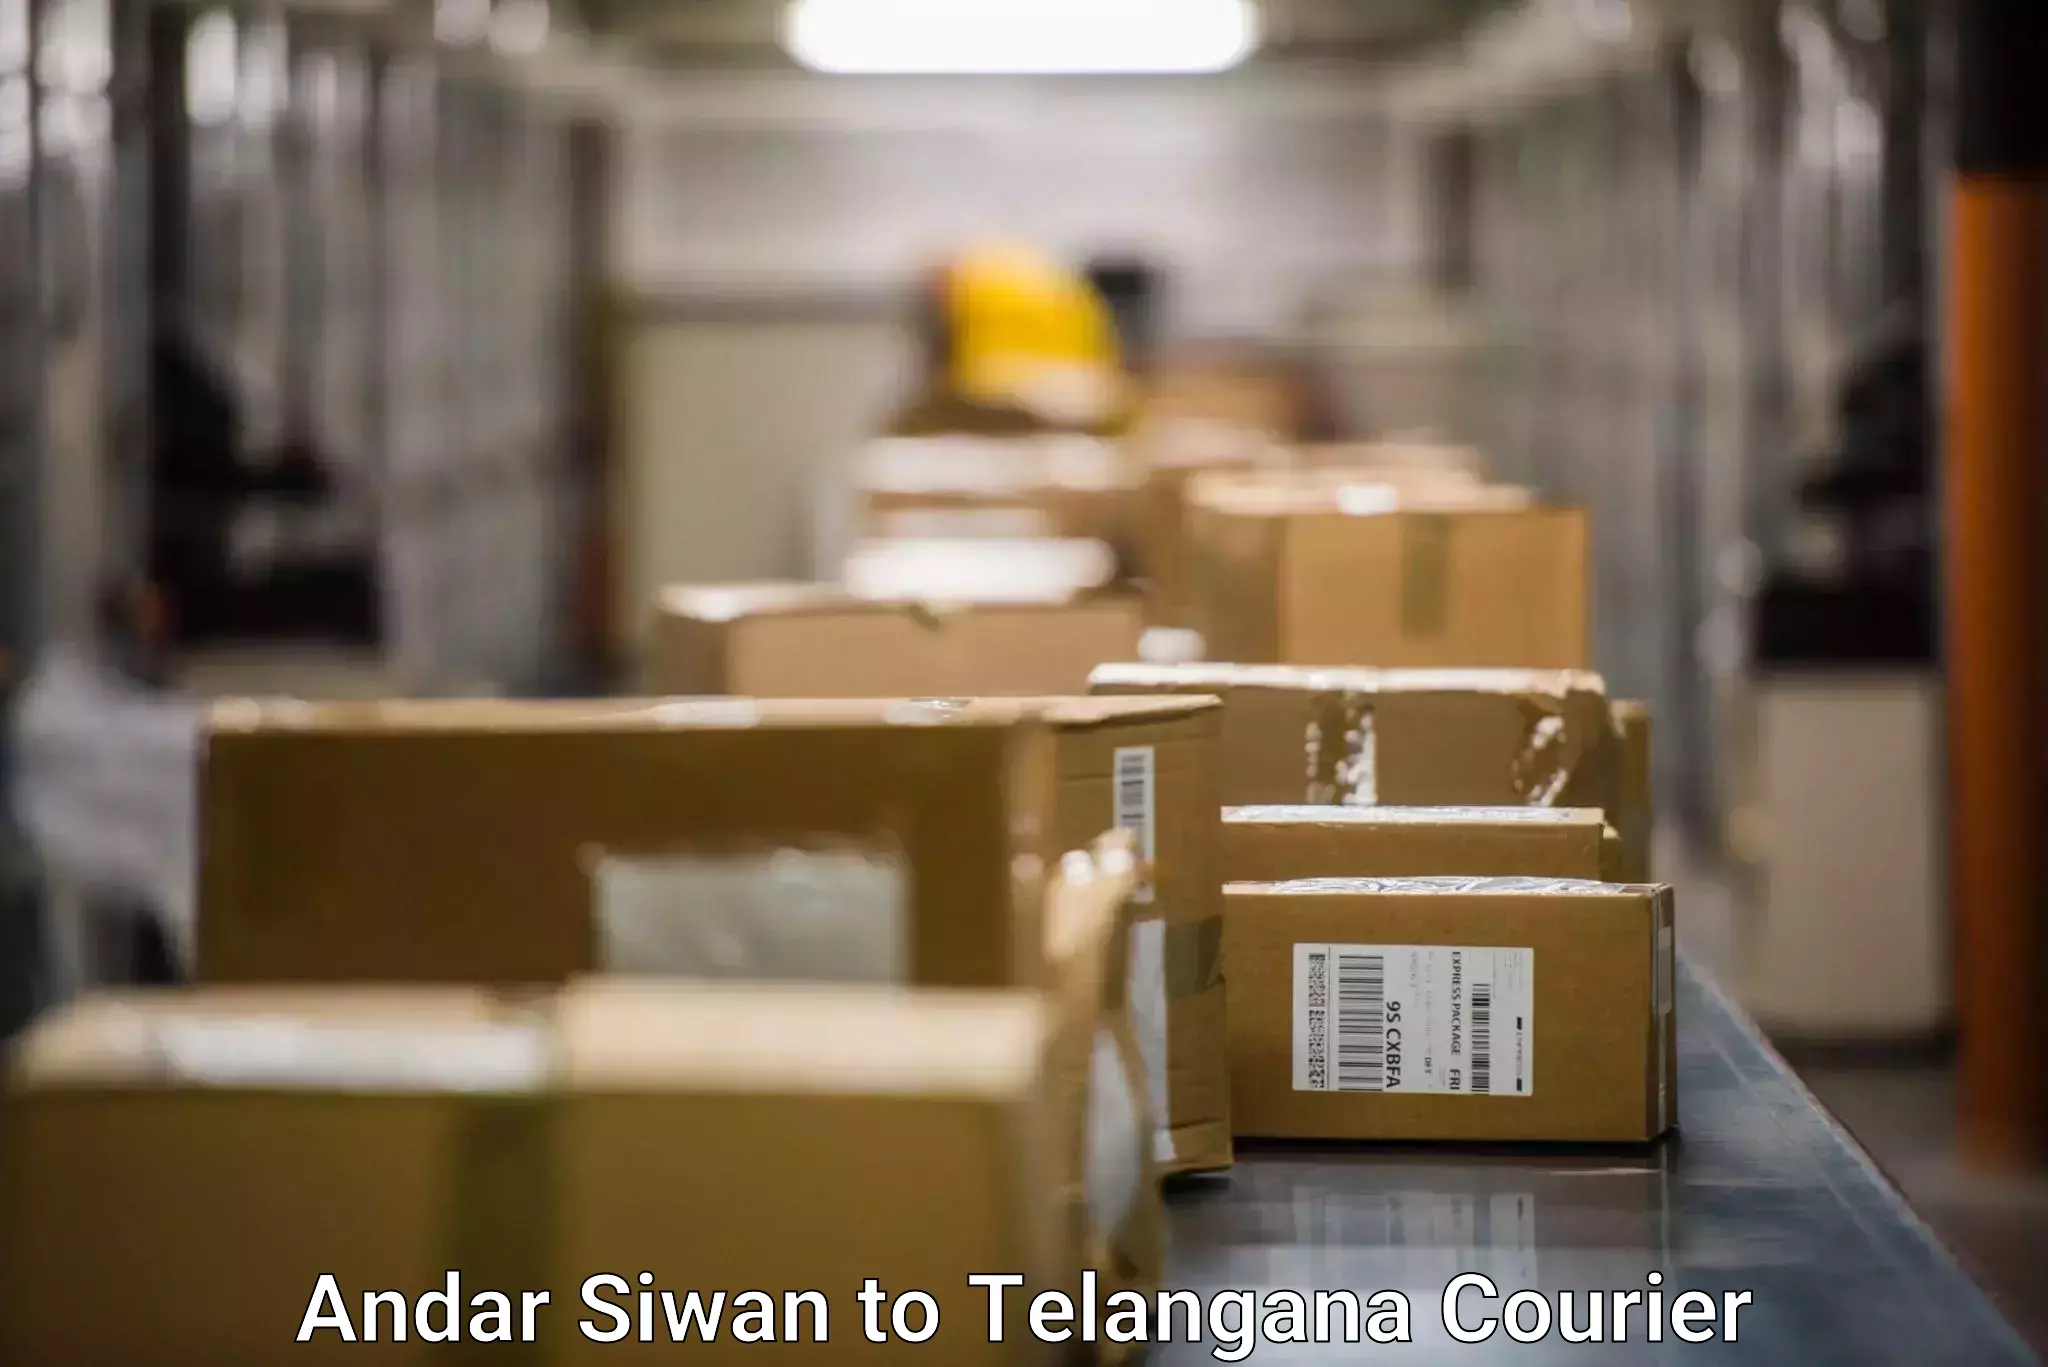 Courier service comparison Andar Siwan to Telangana